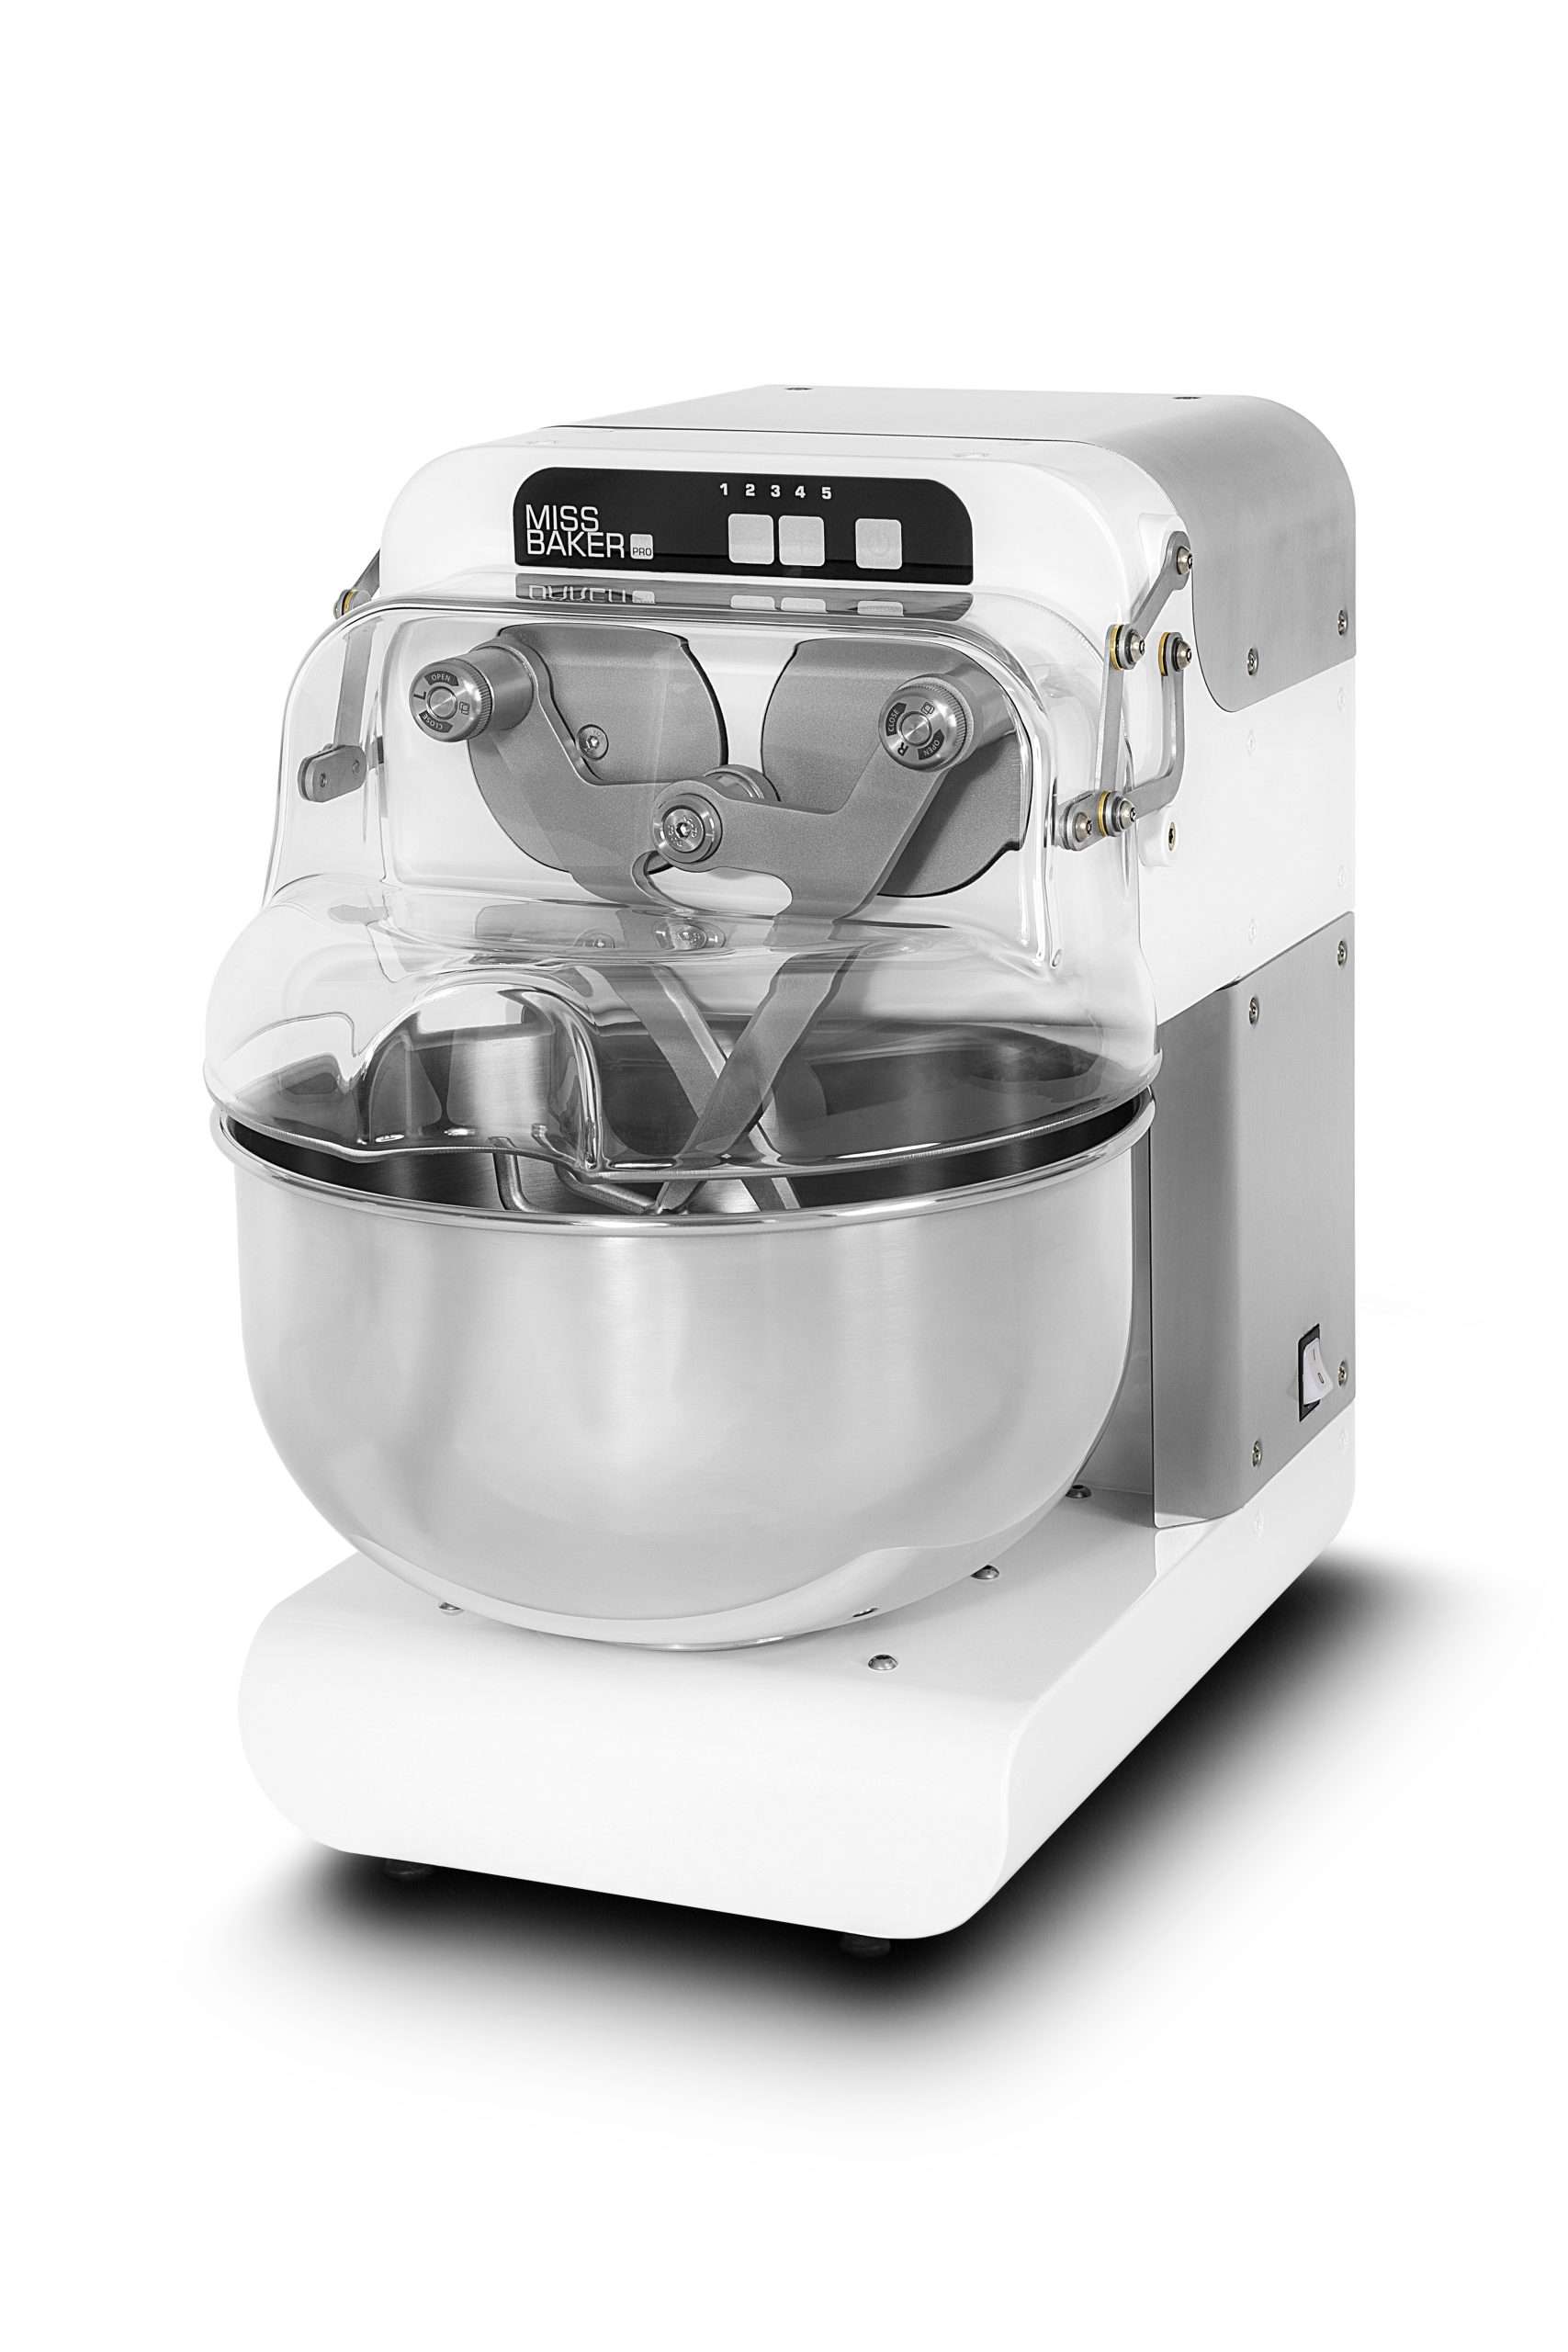 Miss Baker Pro – 4.5kg finished /10 Litre Double Arm Mixer, 5 speed